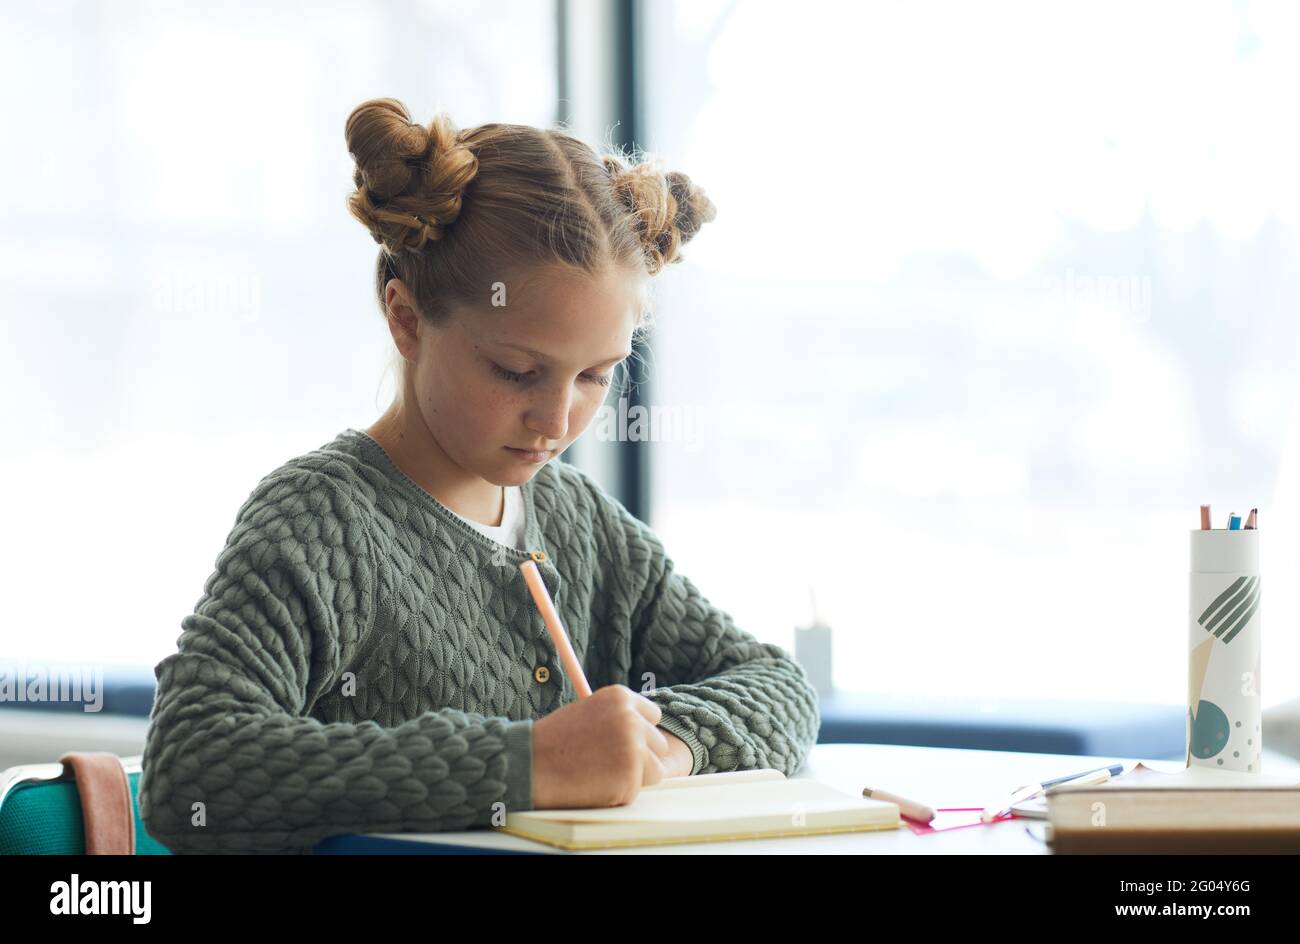 Portrait of cute teenage girl writing in notebook while sitting at desk in school Stock Photo